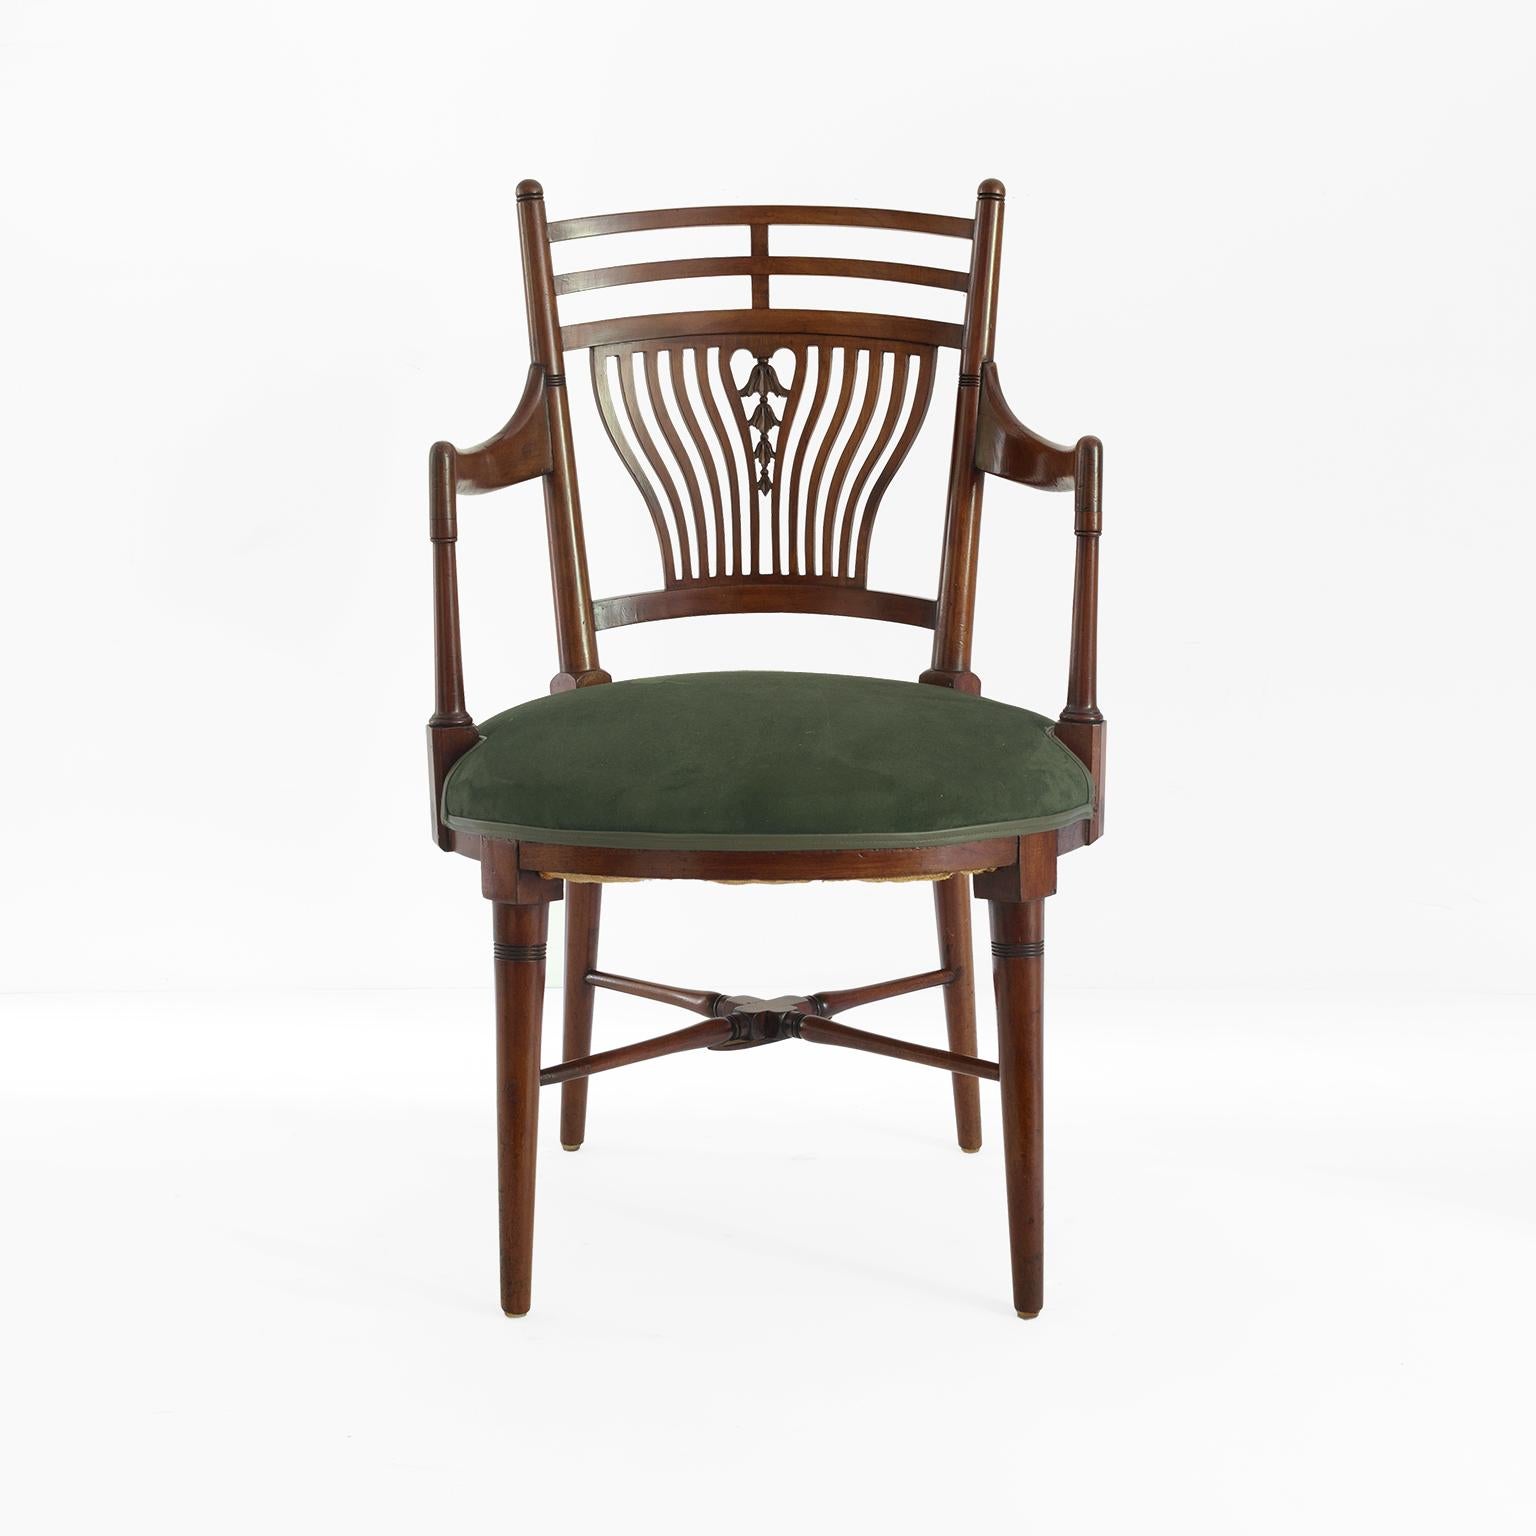 Arts & Crafts Jacobean armchair (1870-1880) possibly designed by Edward William Godwin and produced for William Watt. The chairs features a backrest with ribs in a wave pattern with a lily stalk in the center. The hardwood frame has crossed leg